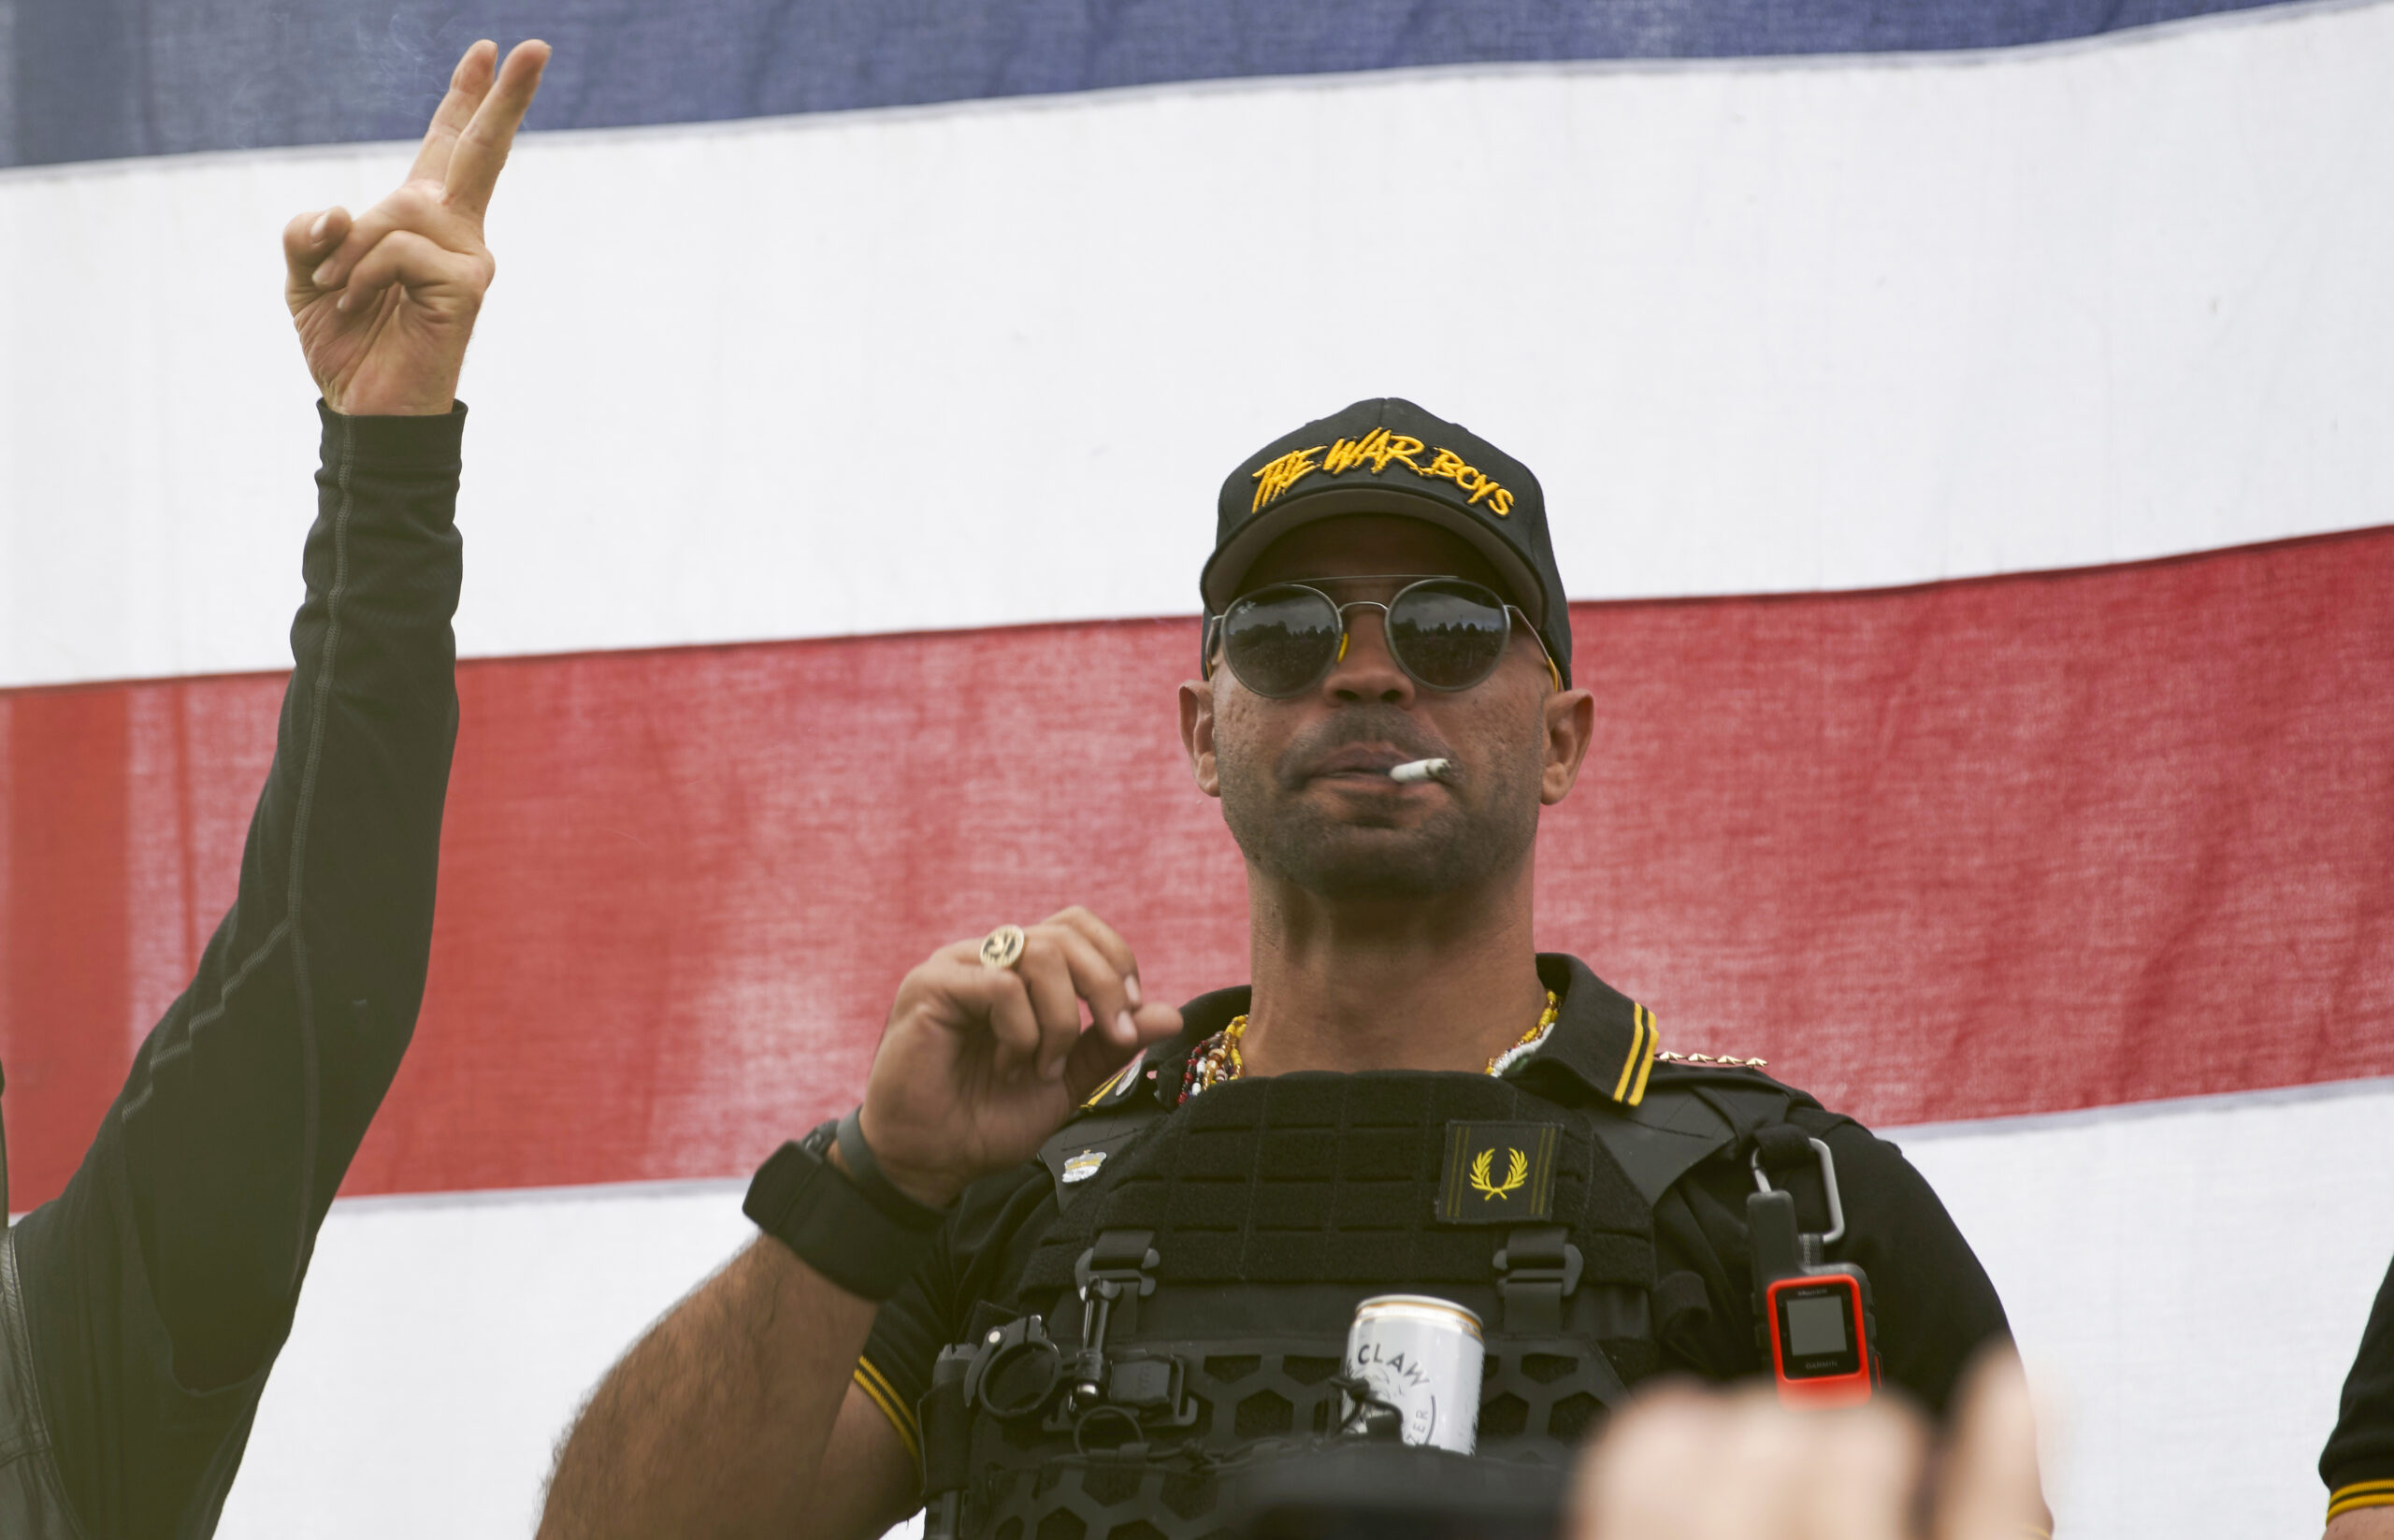 FILE - Proud Boys leader Enrique Tarrio wears a hat that says The War Boys and smokes a cigarette at a rally in Delta Park on Sept. 26, 2020, in Portland, Ore. Tarrio, the former top leader of the far-right Proud Boys extremist group, and other members were indicted Monday, June 6, 2022, on seditious conspiracy charges for what federal prosecutors say was a coordinated attack on the U.S. Capitol to stop Congress from certifying President Joe Biden's 2020 electoral victory.(AP Photo/Allison Dinner, File)